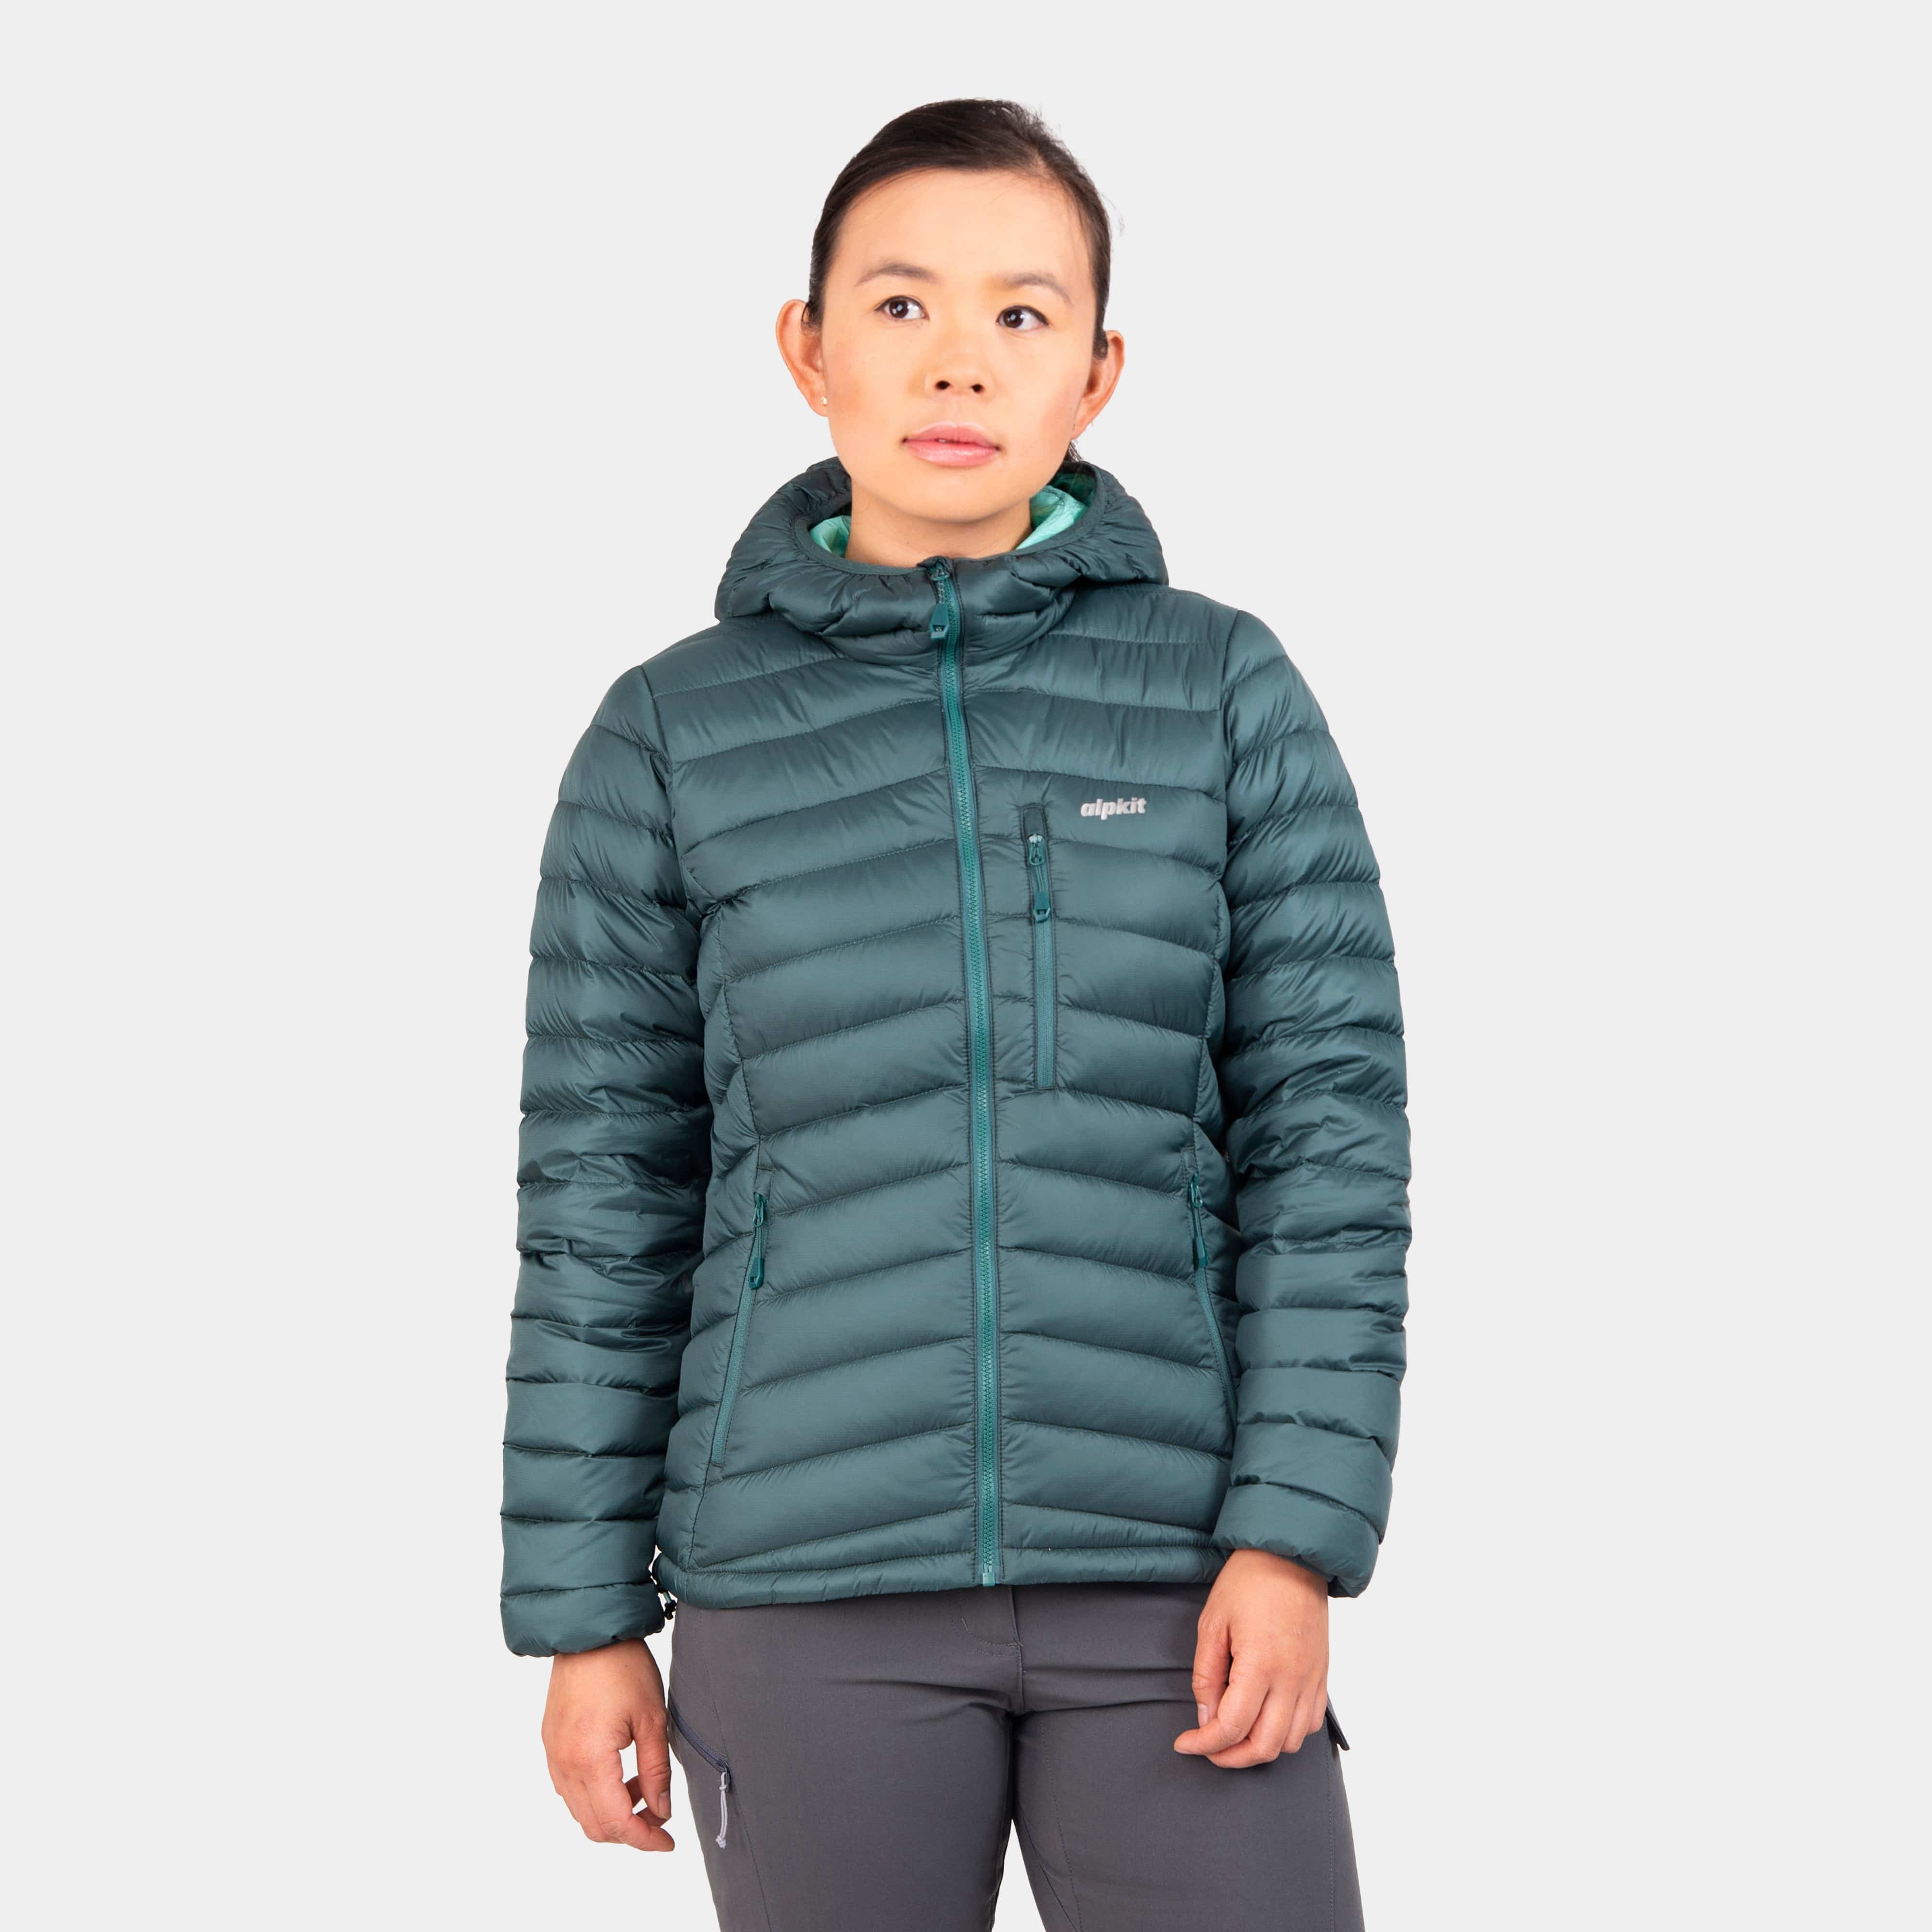 Down Jackets and Synthetic Insulation Range